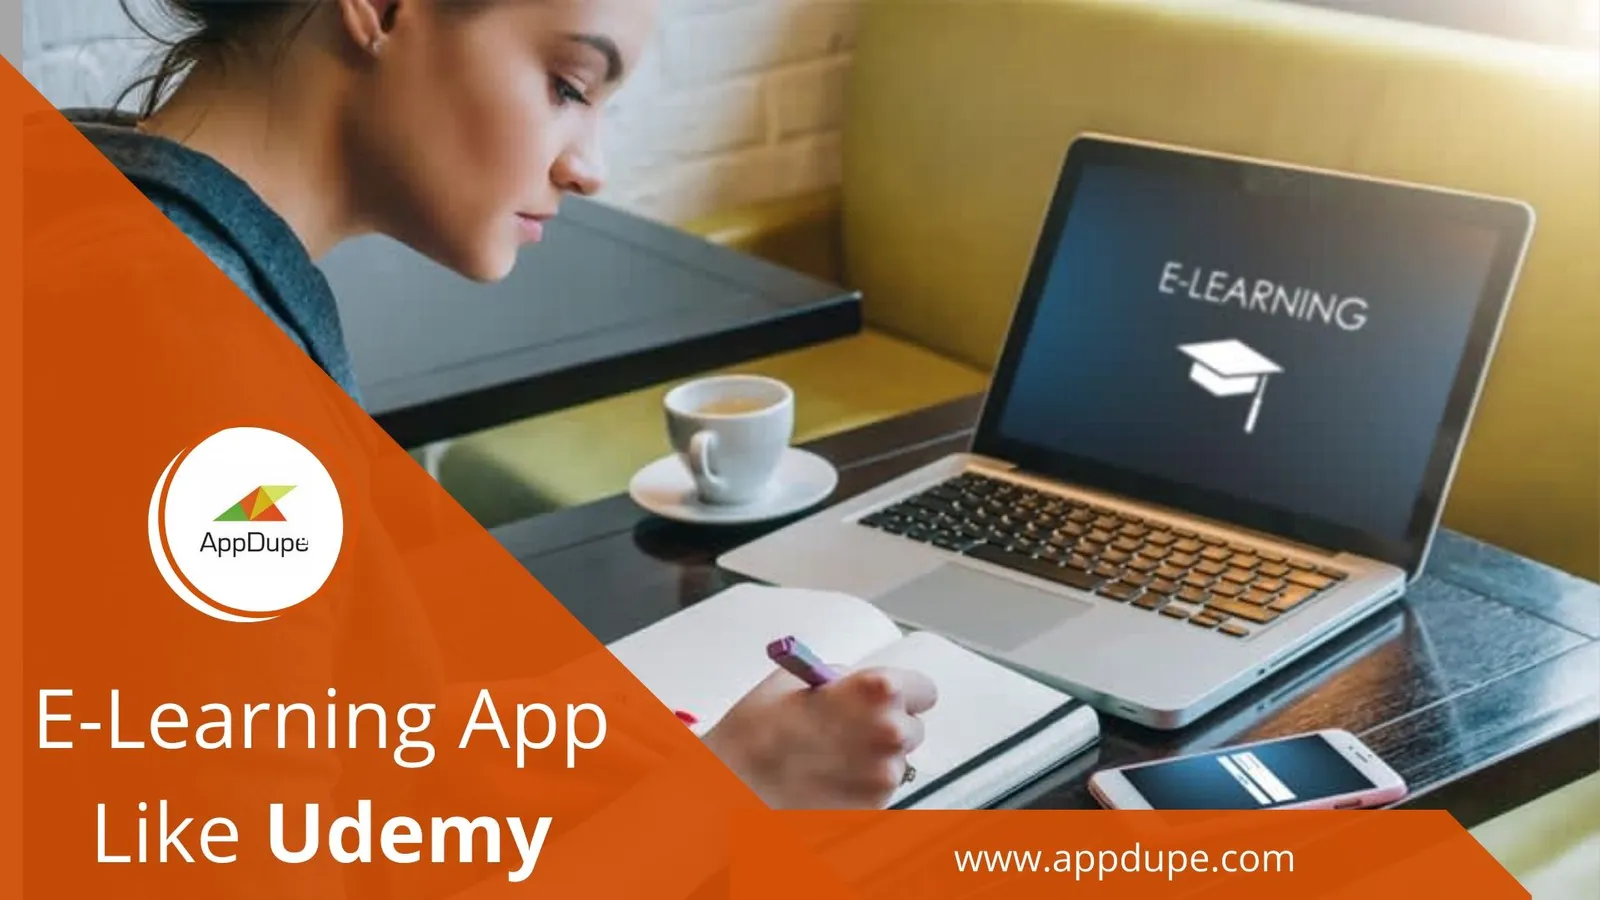 What are the perks of using an e-learning app like Udemy?